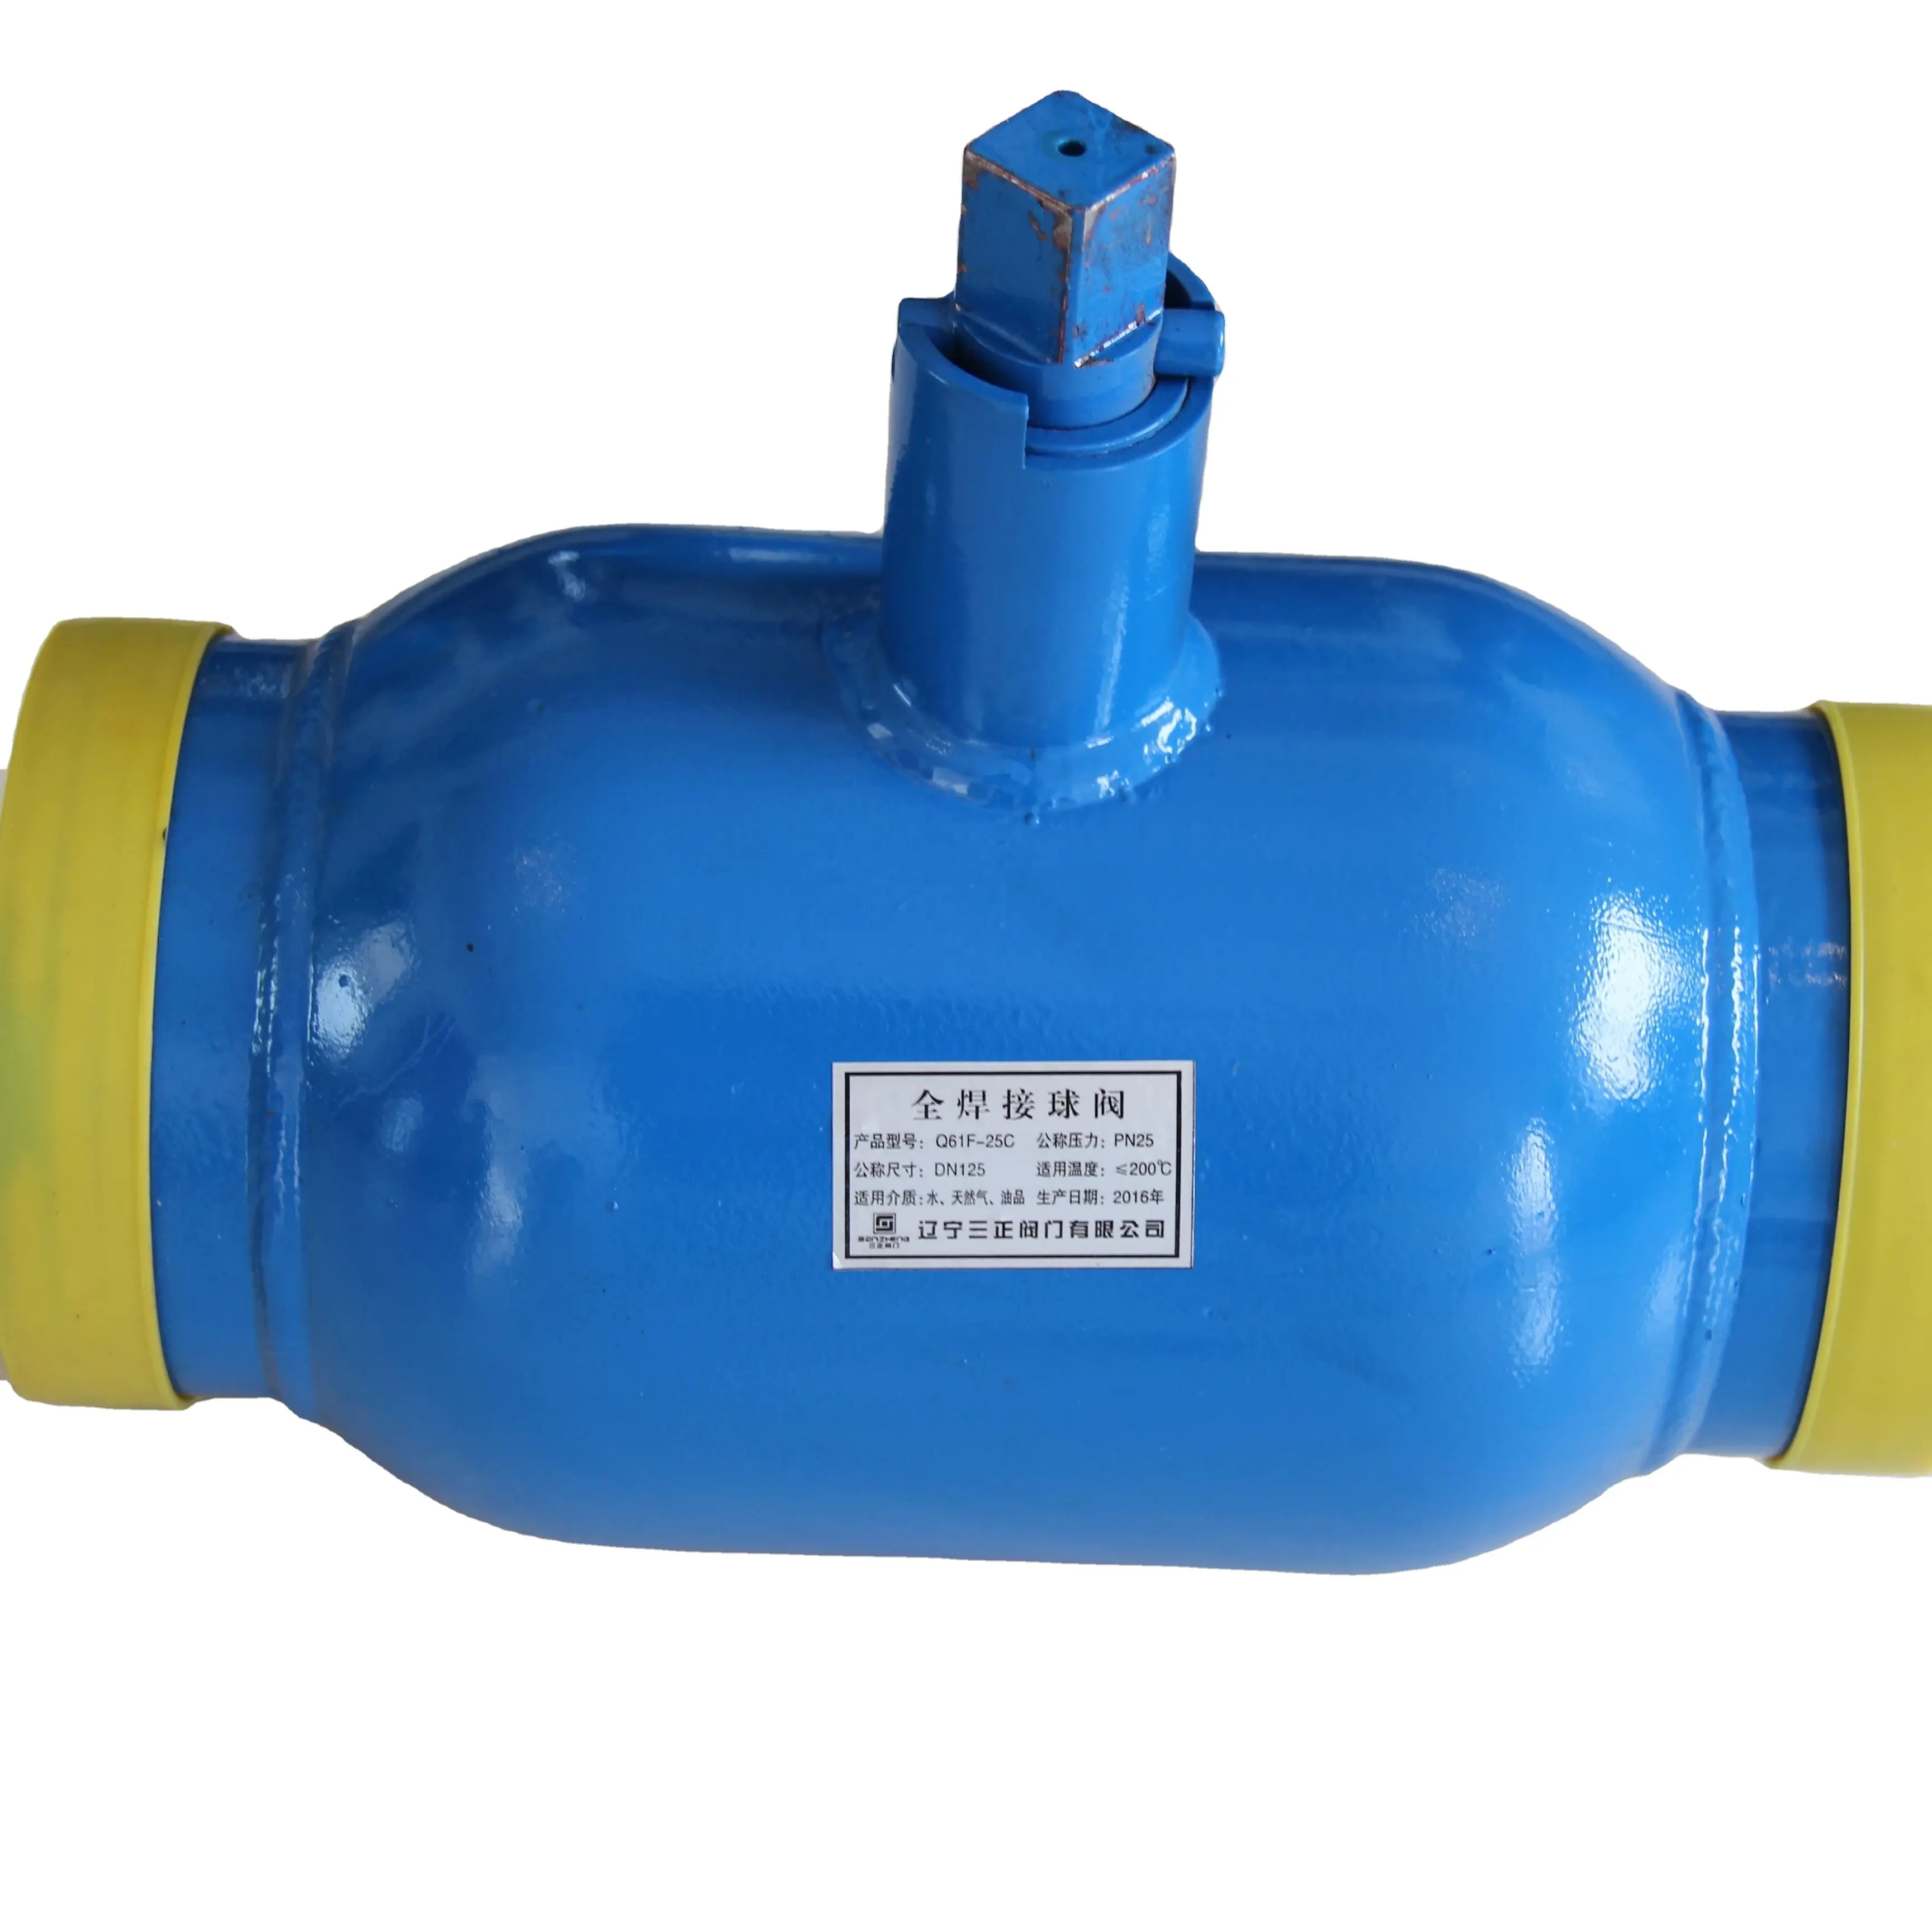 STAINLESS STEEL SOFT SEAL REDUCED DIAMETER TURBINE BALL VALVE Q367F DN 800 WATER/GAS WITH LOW PRESSURE PRODUCED IN LIAONING